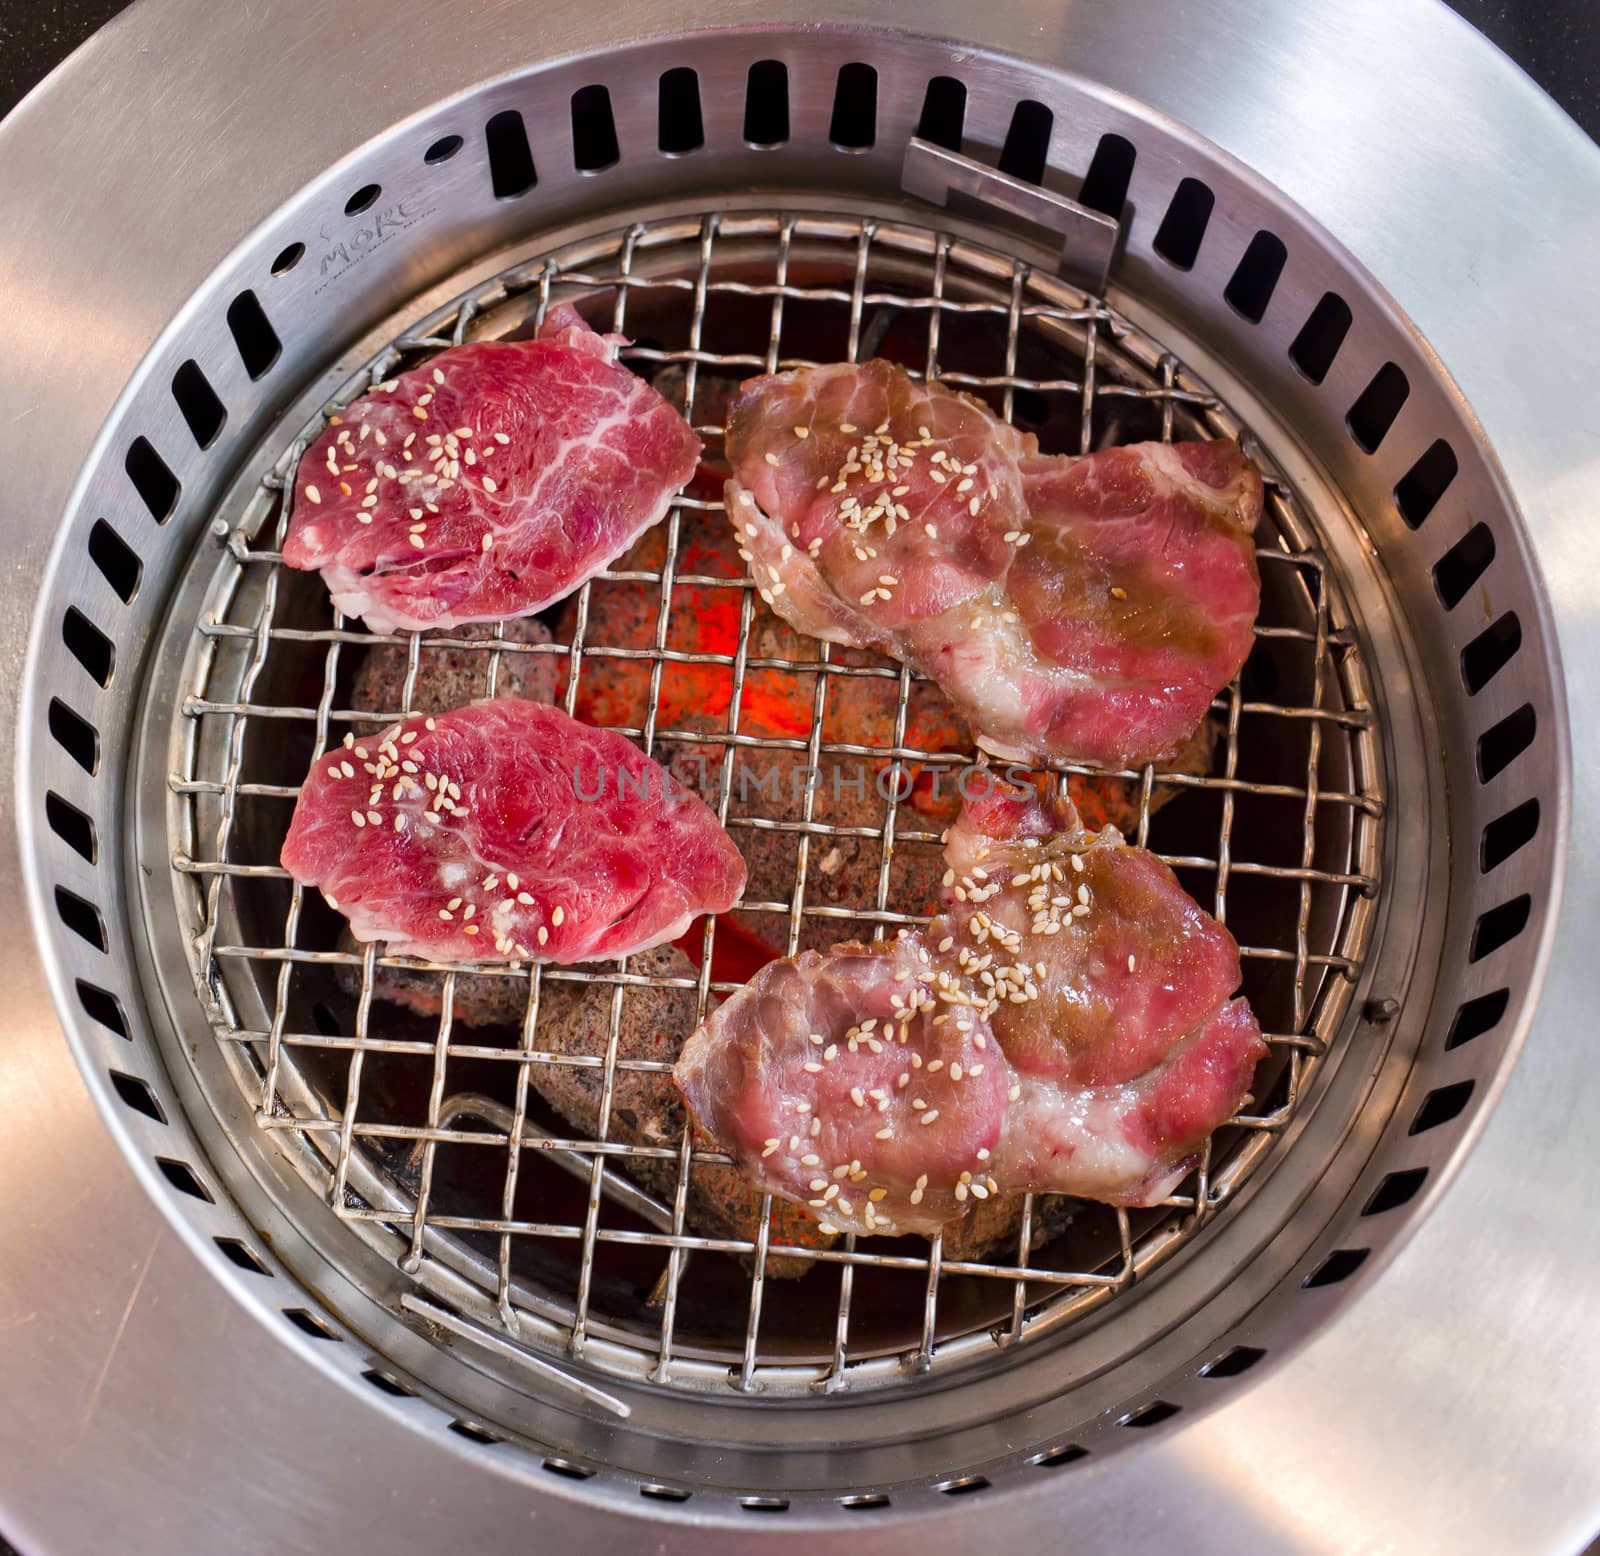 slide beef on the grill in japanese restaurant.